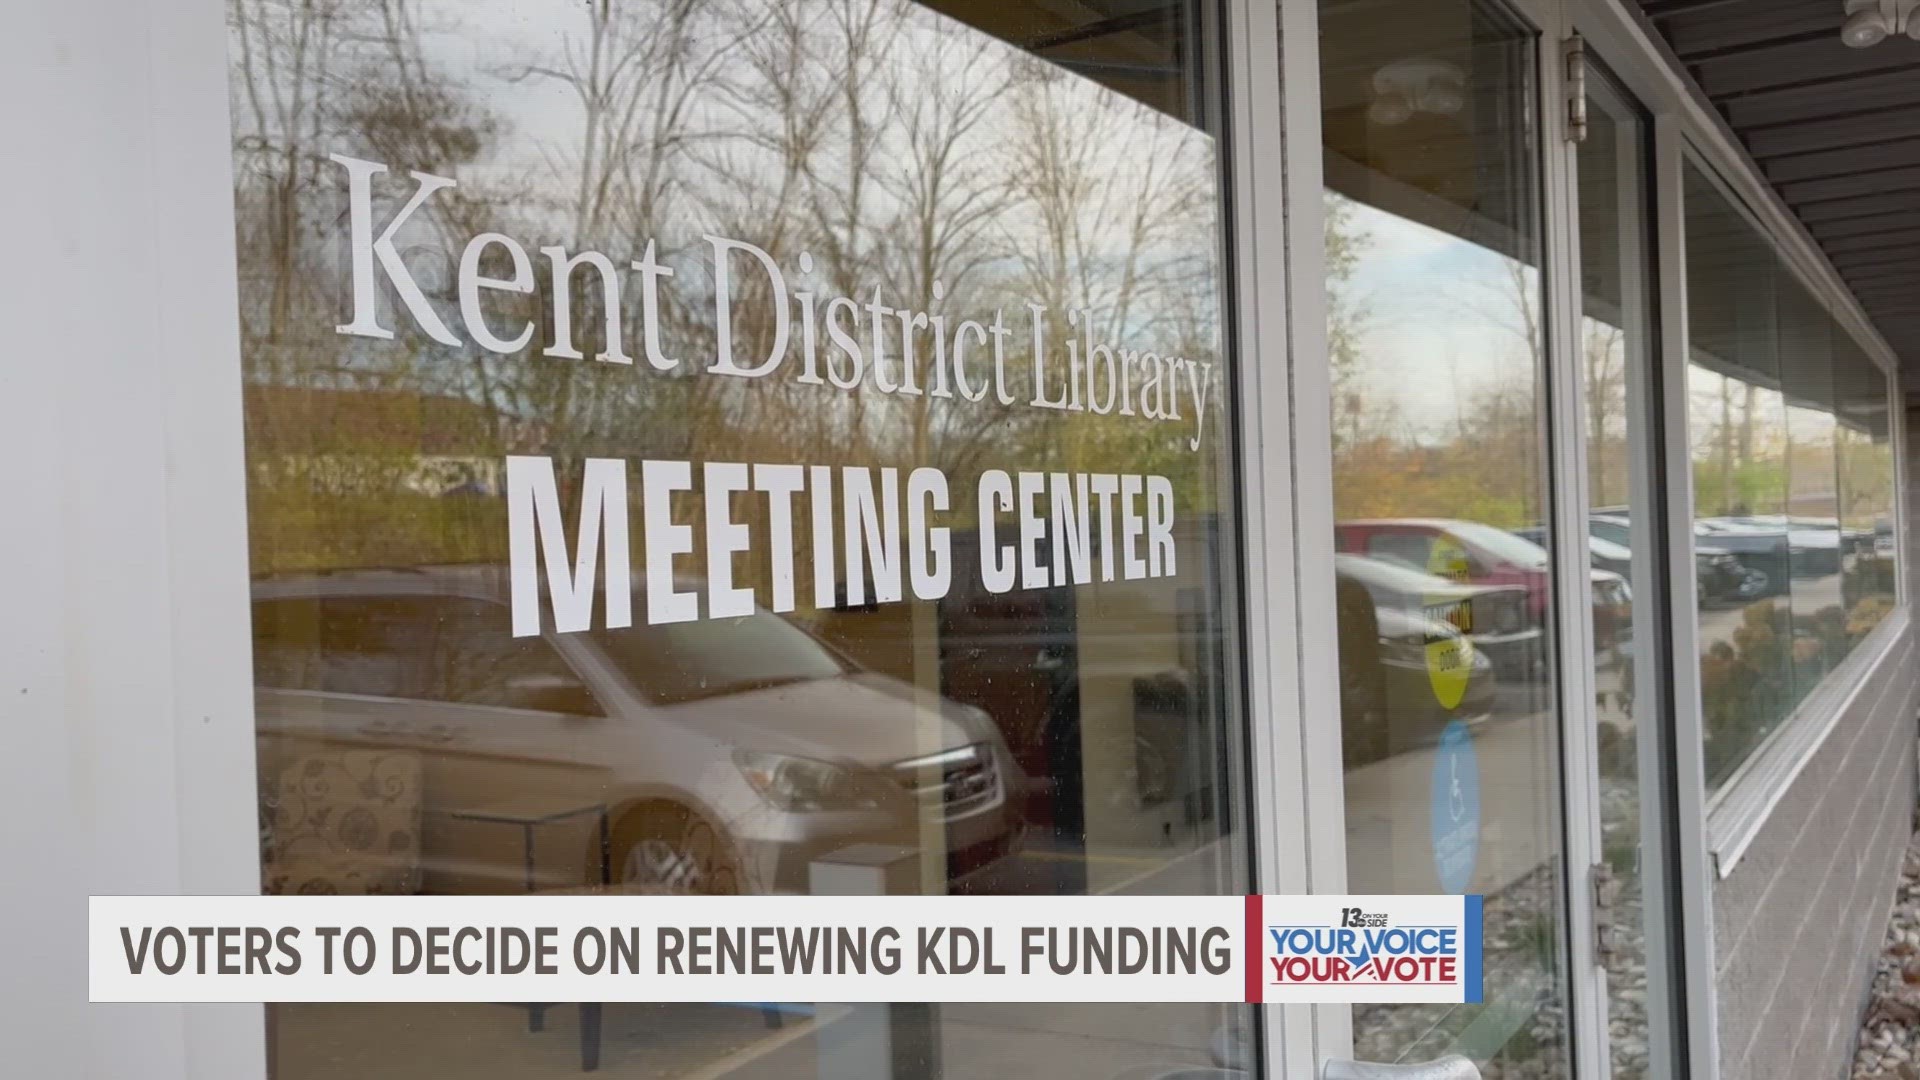 Kent District Library is facing a critical vote in the November election, hoping to get approval from the voters for a new 15-year millage.